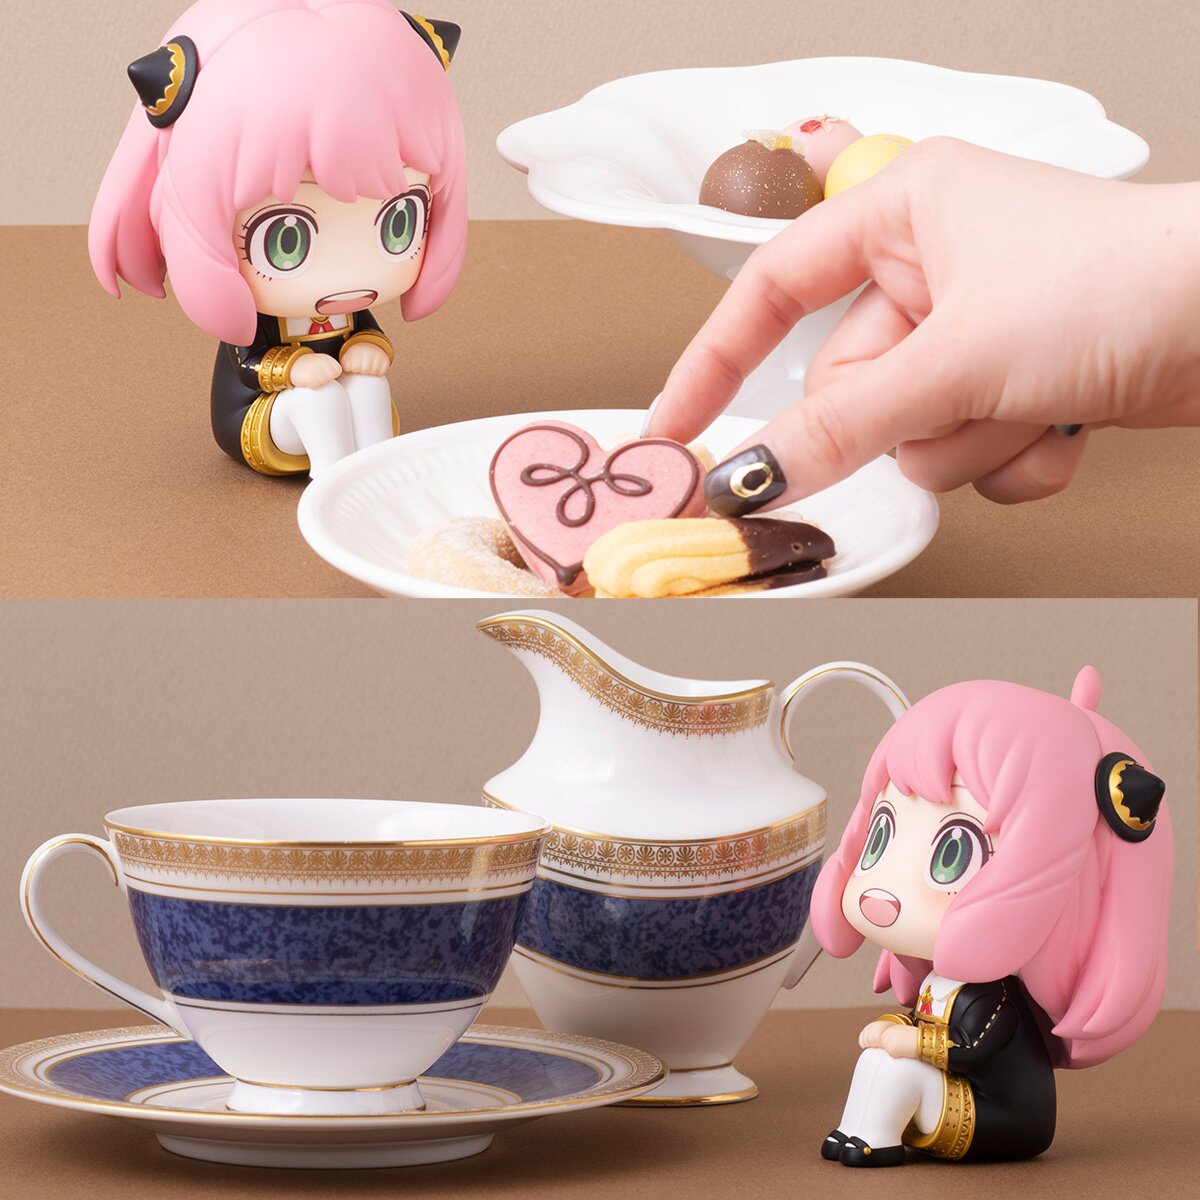 Buy Kawaii Anya Glass Cup in Dream Creations. Check Kawaii Anya Glass Cup  the best price and quality. The best shop for Anime products in the United  States